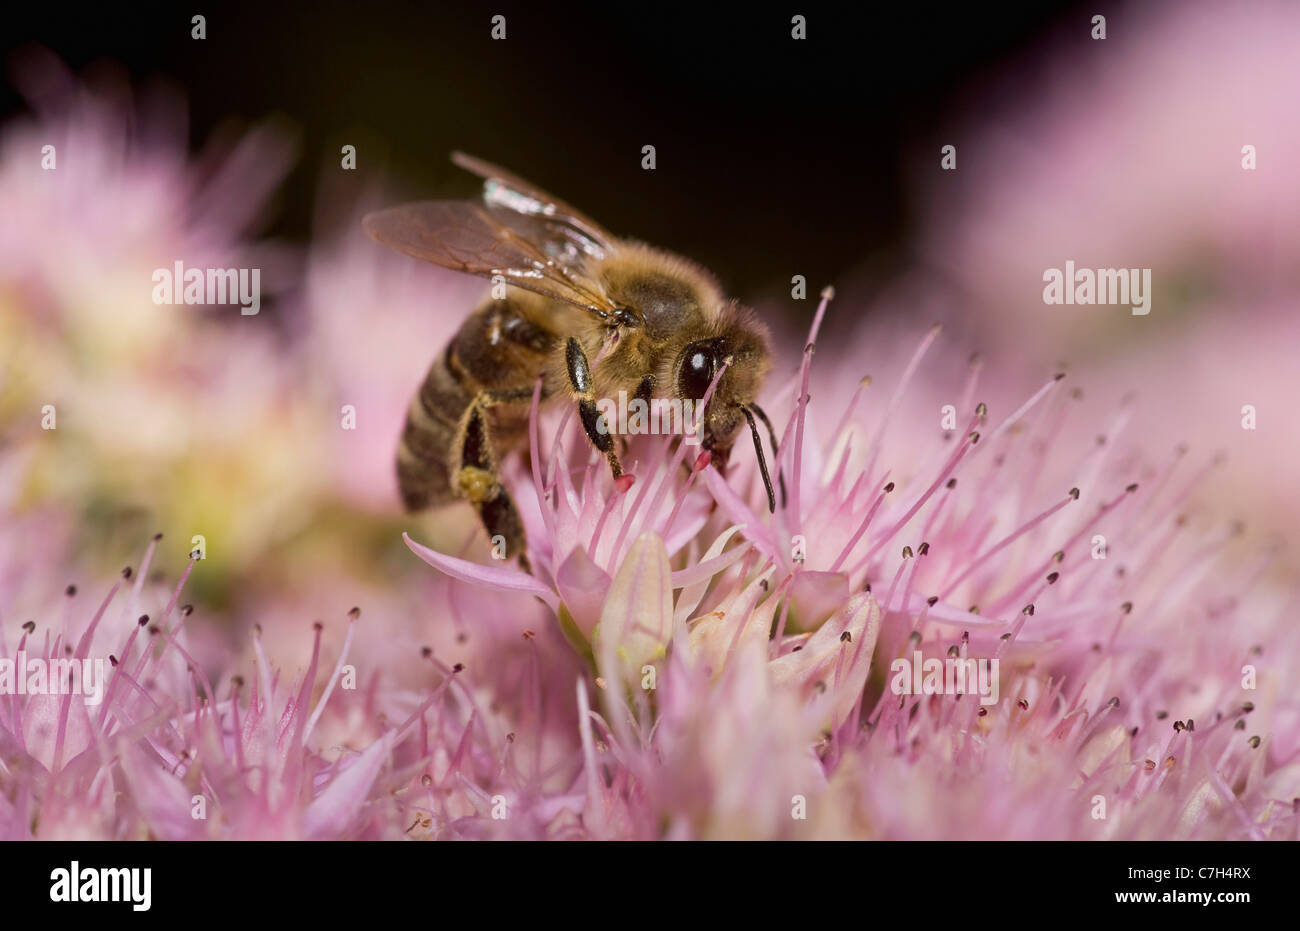 A honey bee (Apis mellifica) perched on a flower Stock Photo